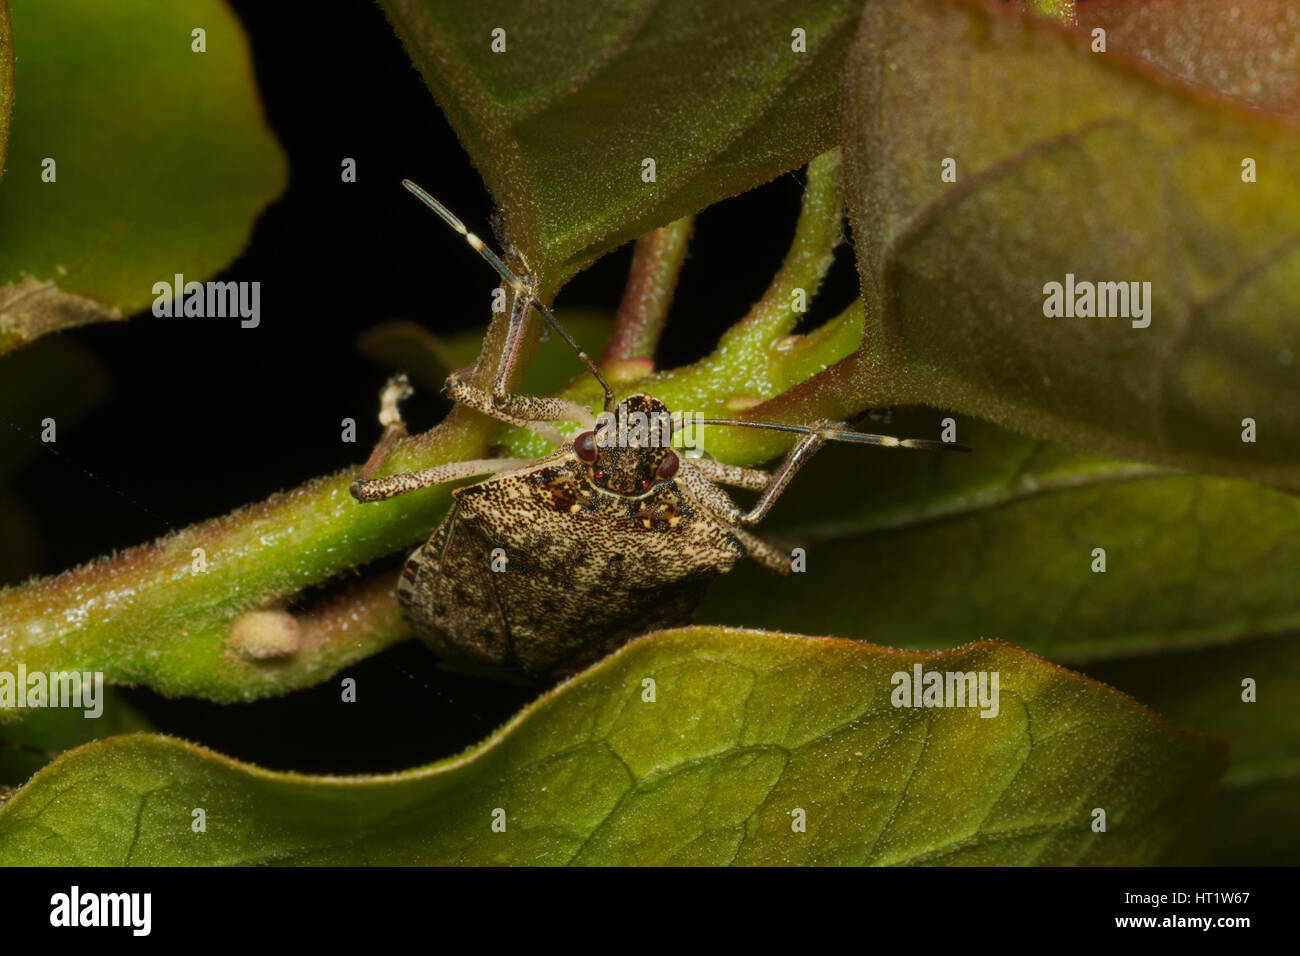 Brown marmorated stink bug (Halyomorpha halys) agricultural pest; italian cimice asiatica Stock Photo